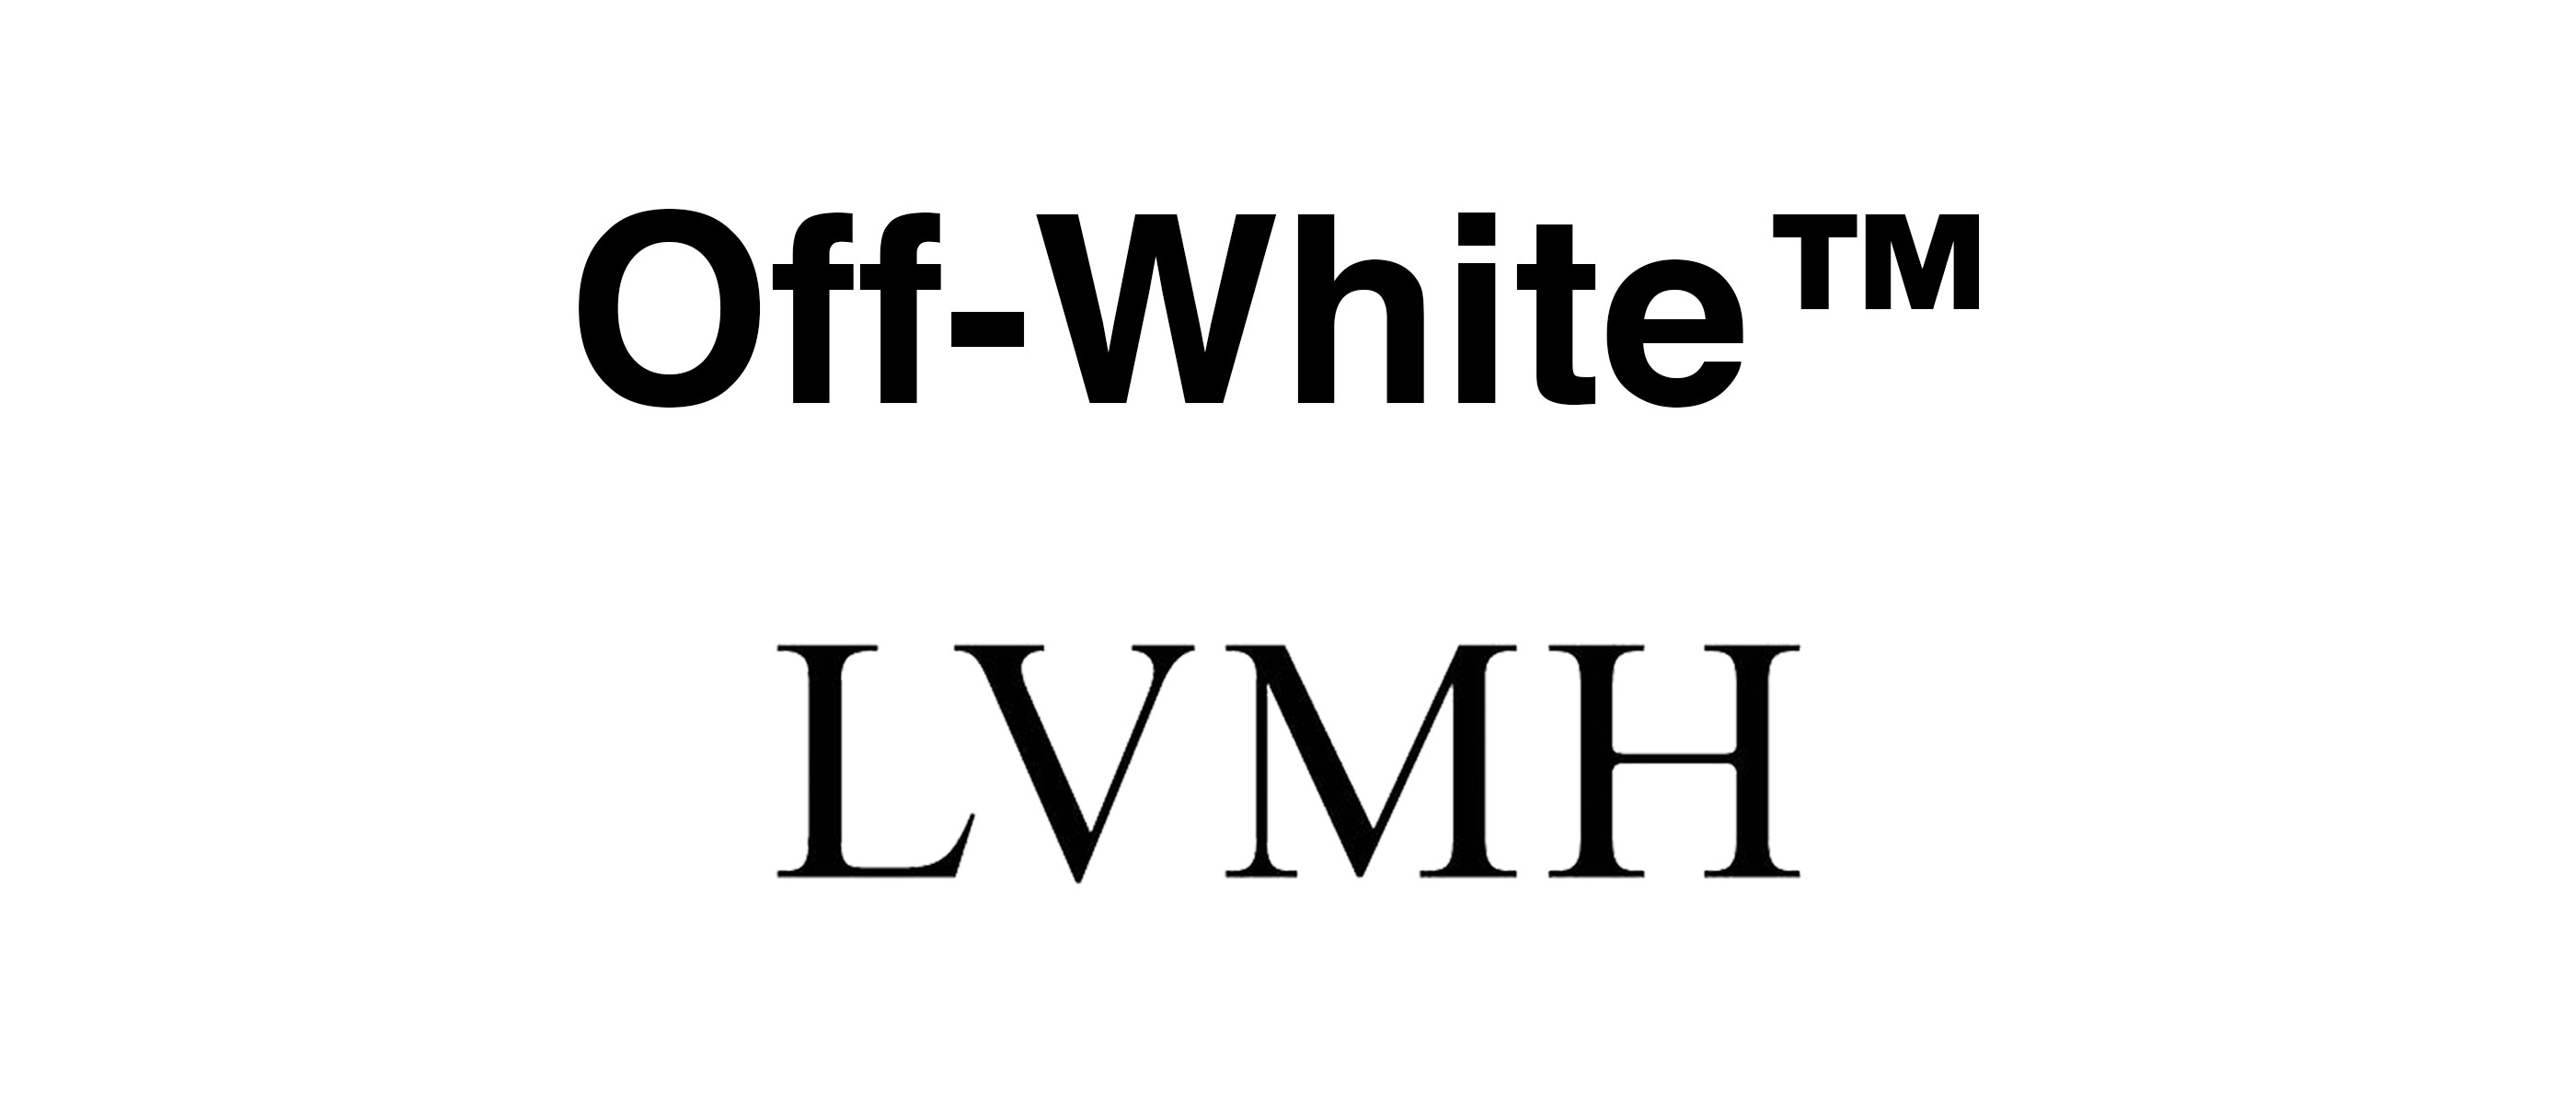 LVMH to Buy Majority Stake in Off-White, Expand Virgil Abloh's